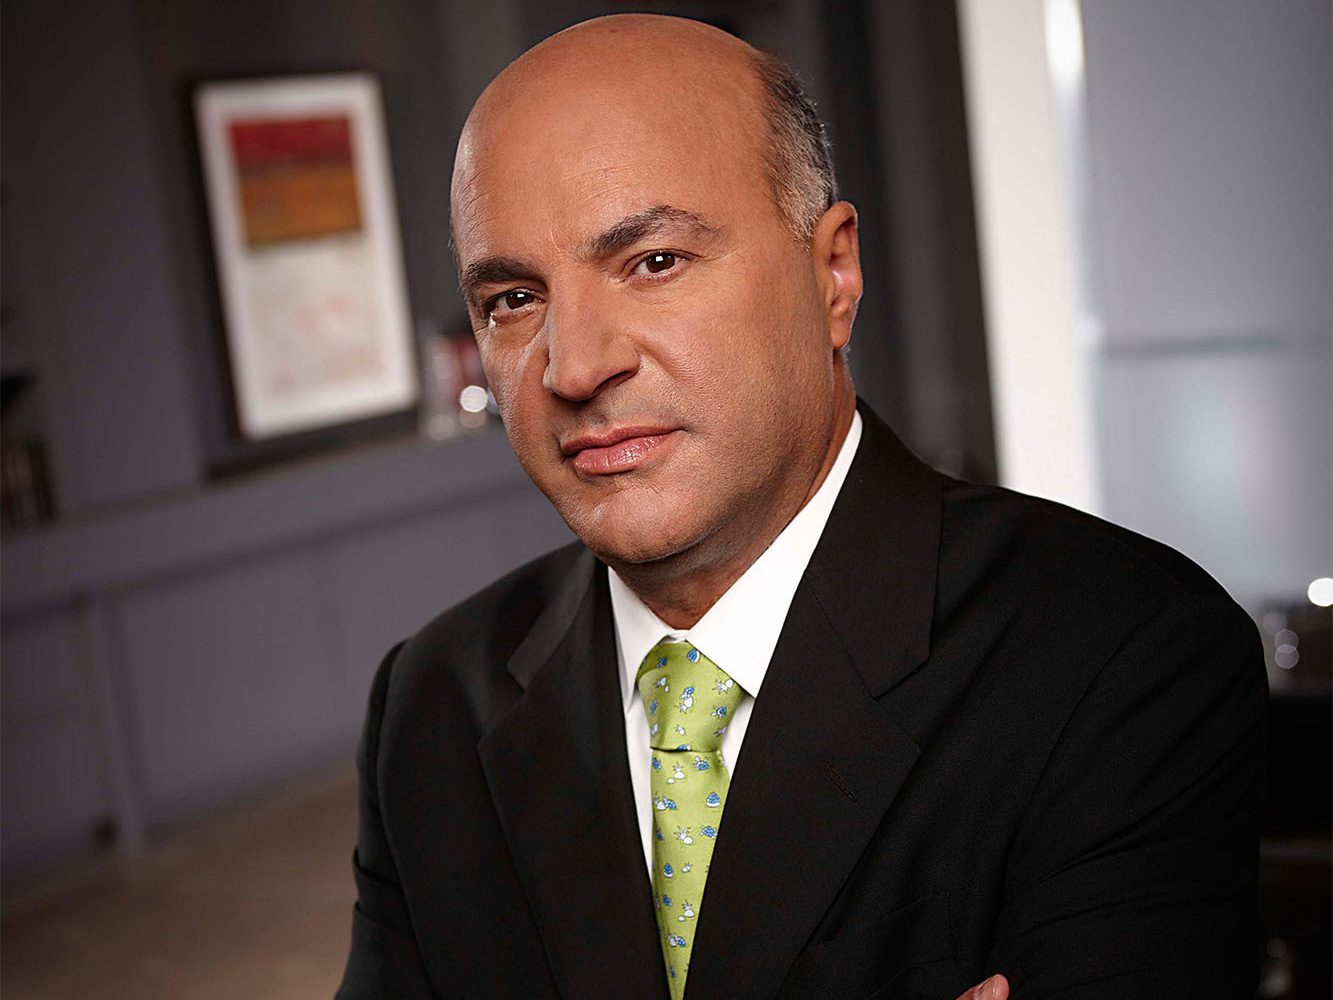 16. Kevin O'Leary